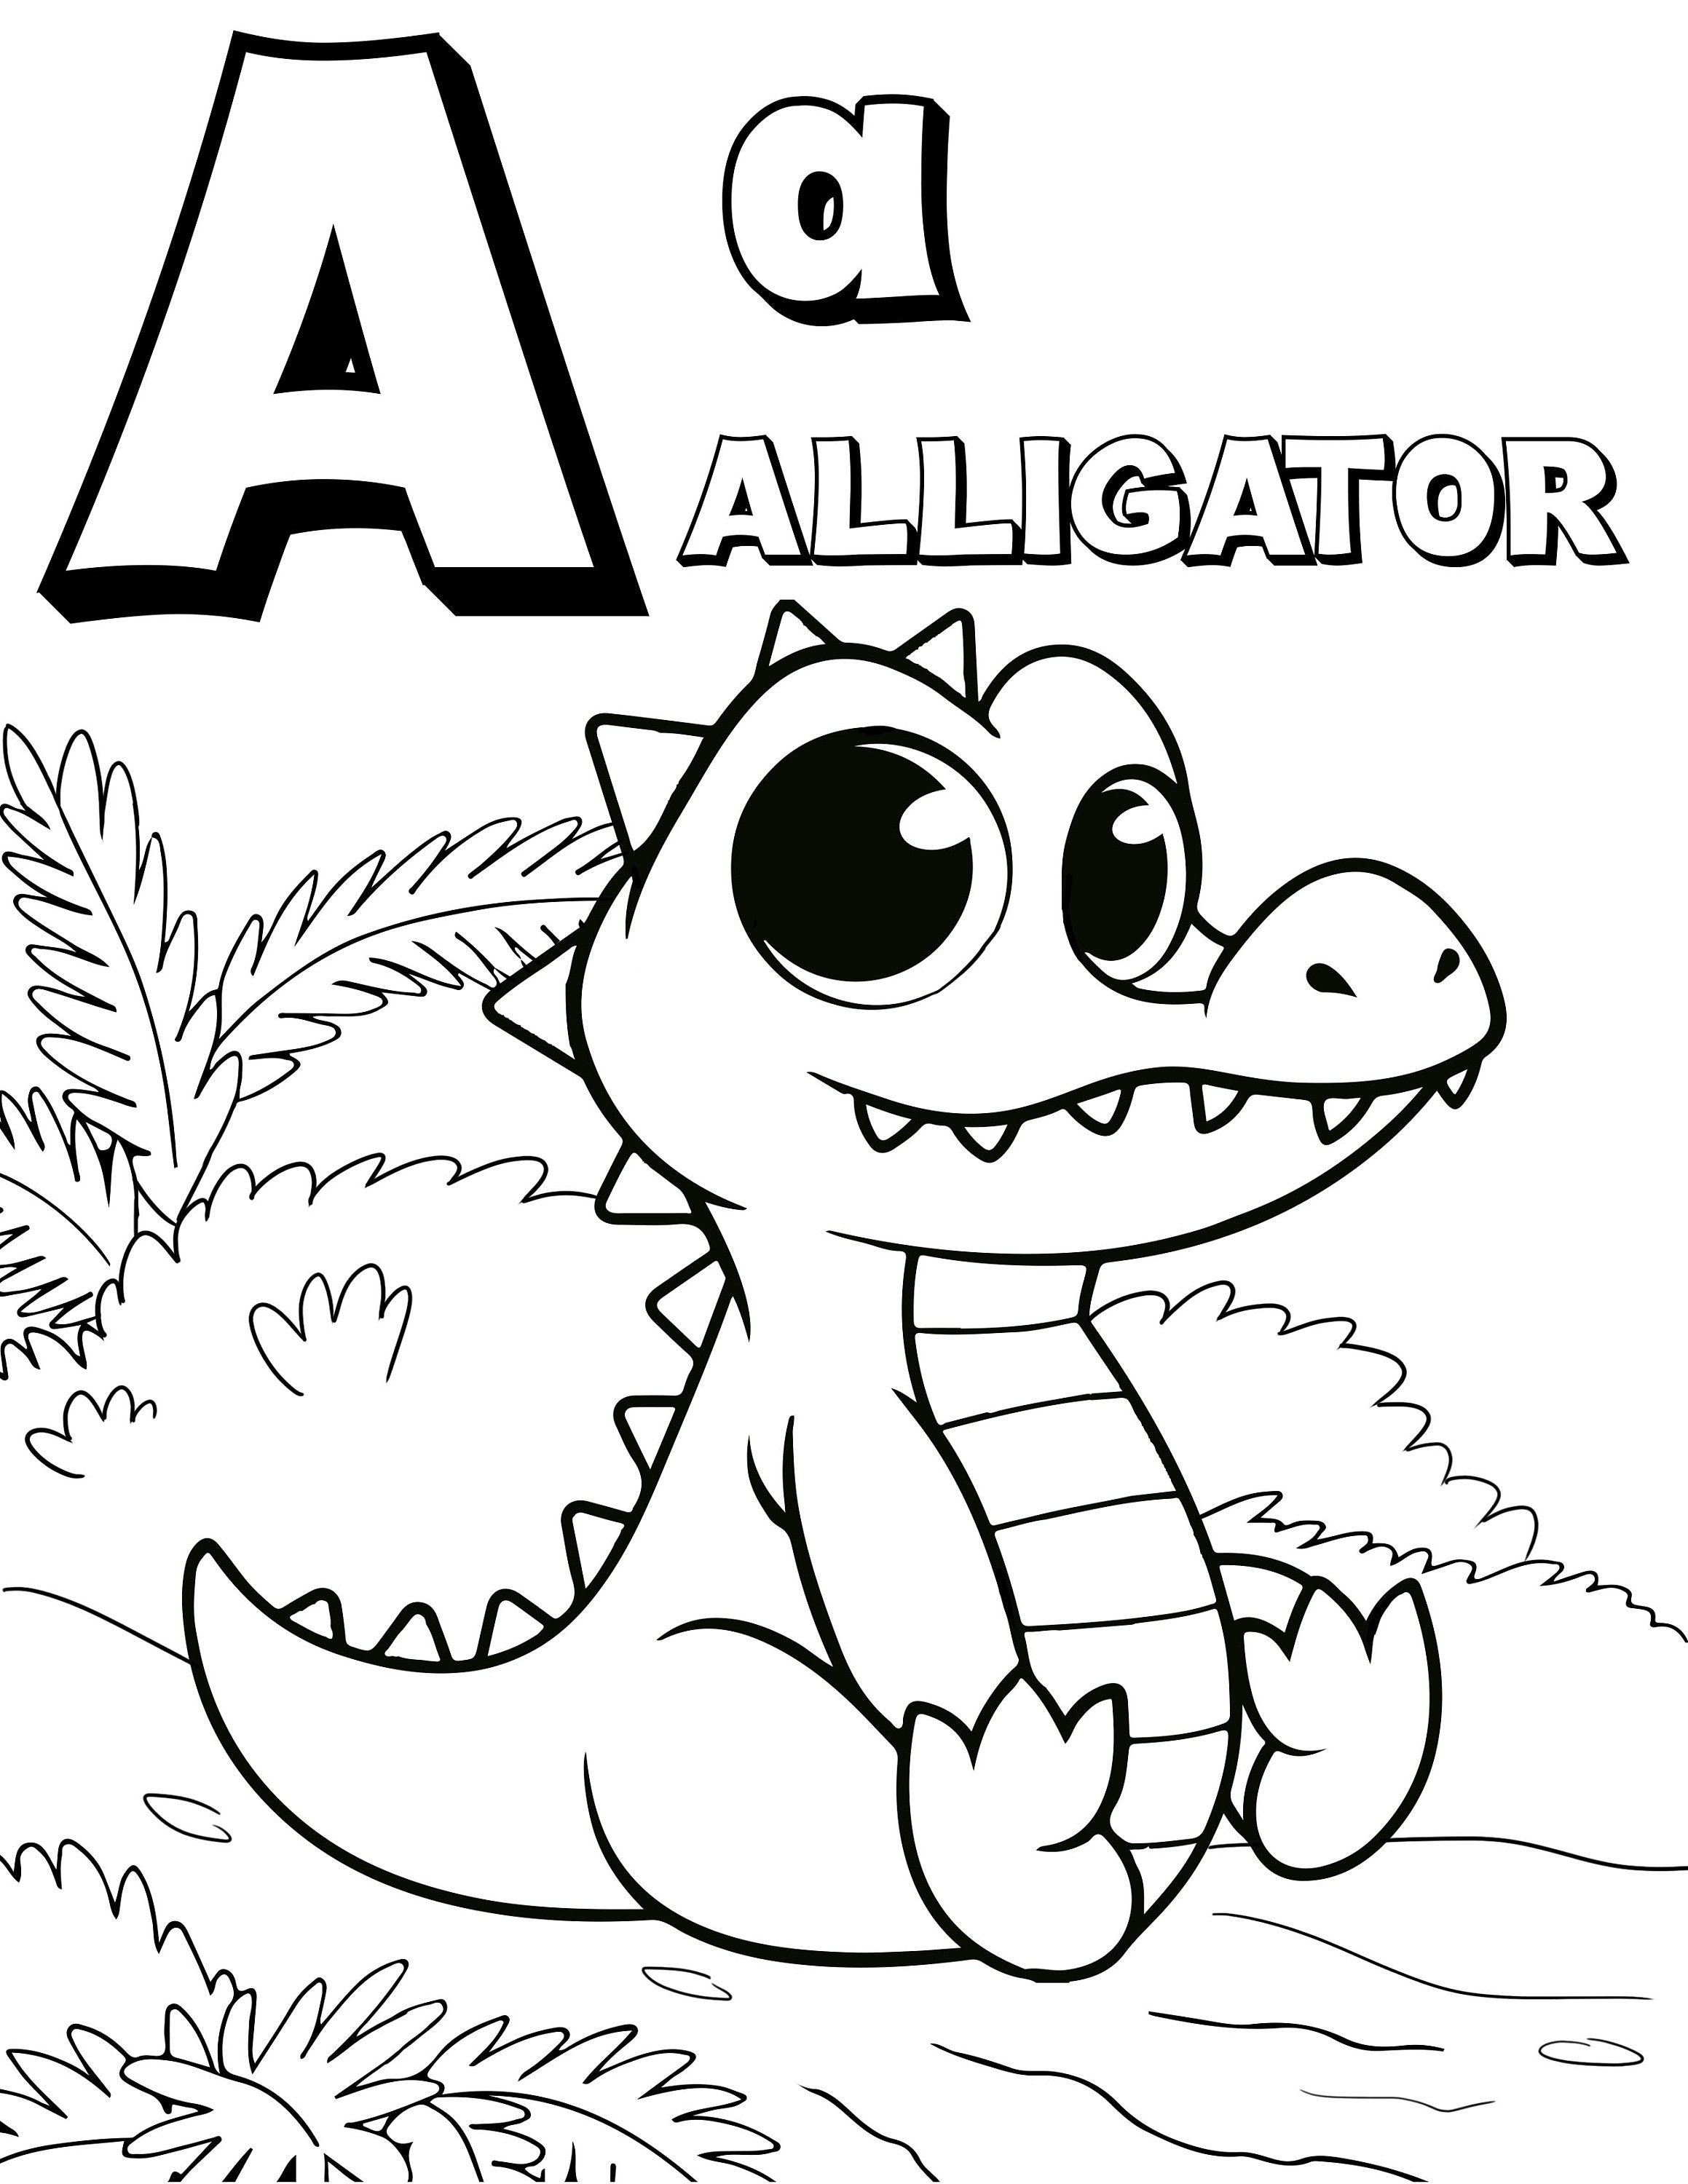 printable-abc-coloring-book-coloring-pages